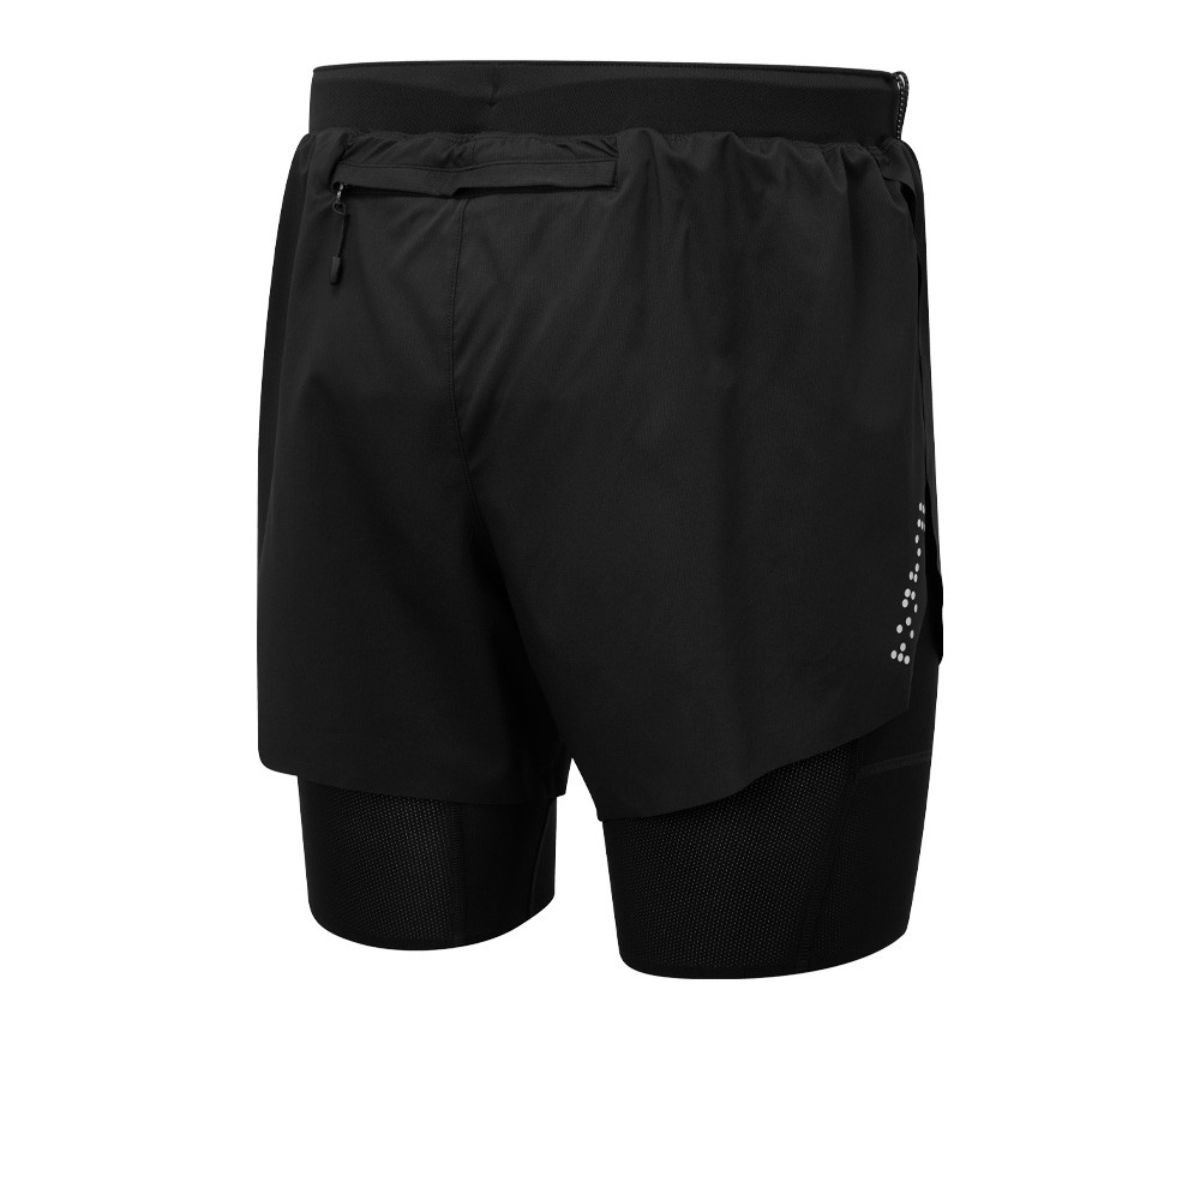 ron_hill_tech_distance_twin_shorts_løpeshorts_med_tights